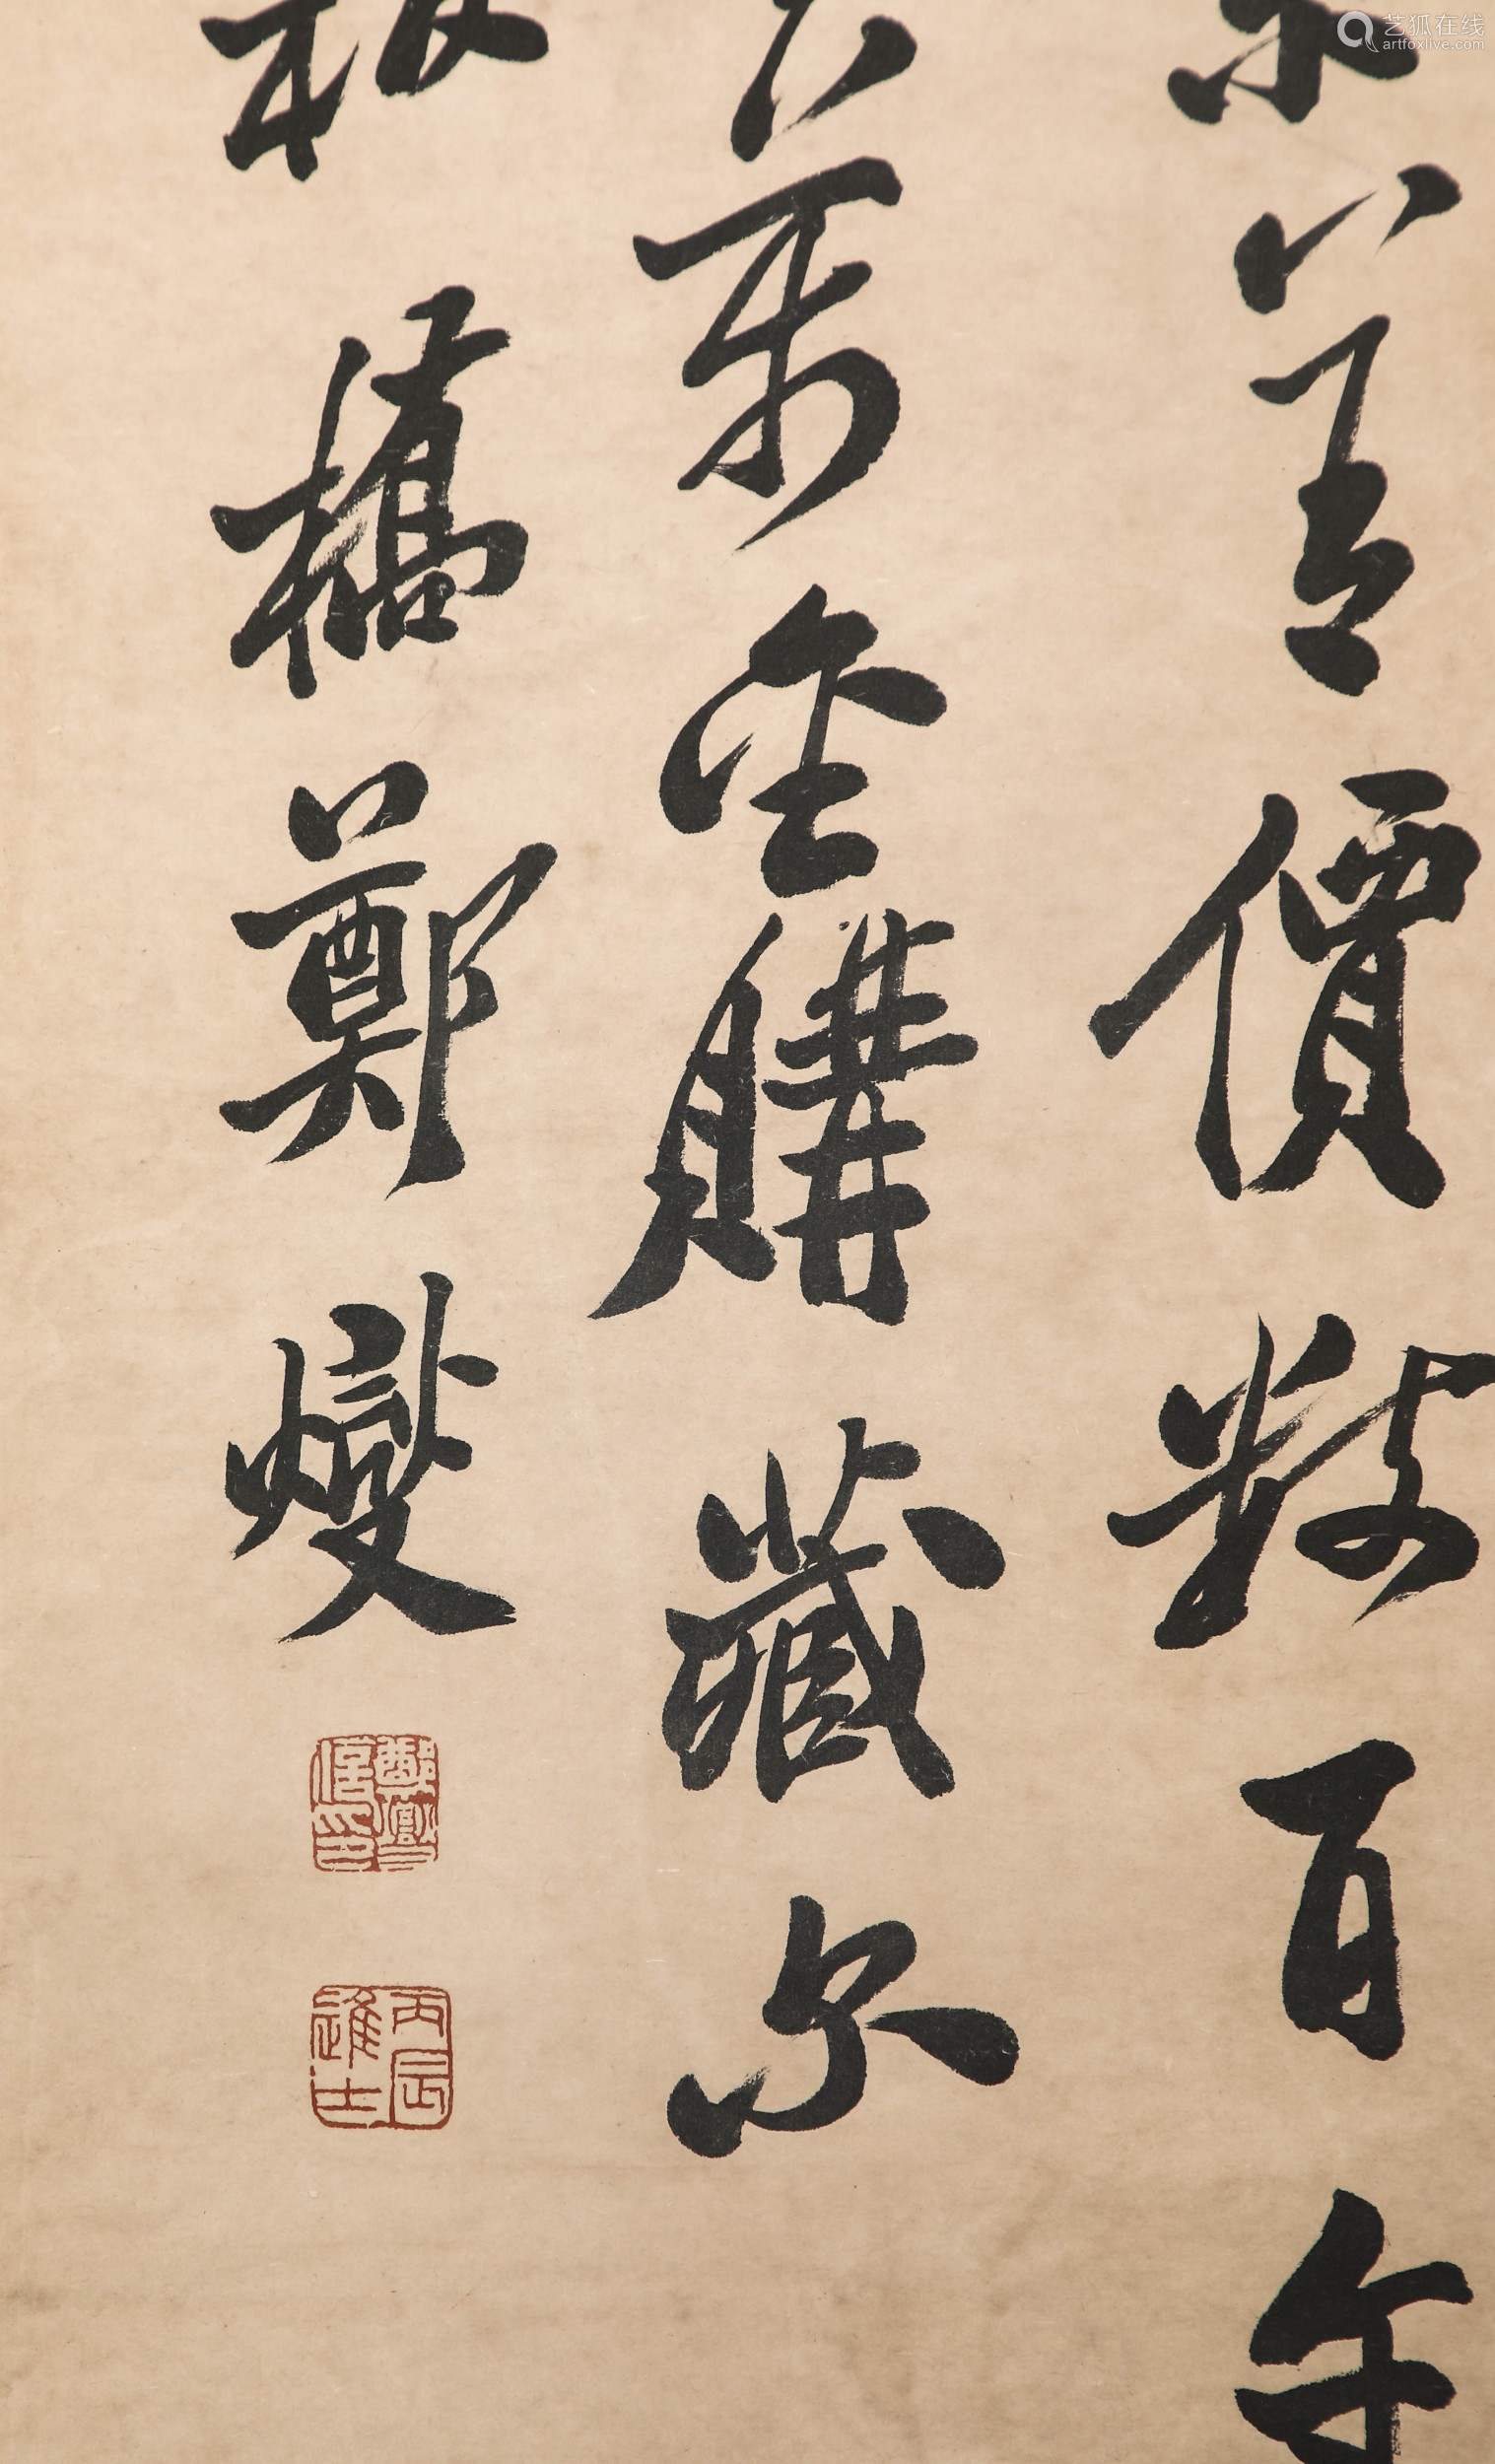 Chinese ink painting,
Zheng Banqiao's calligraphy